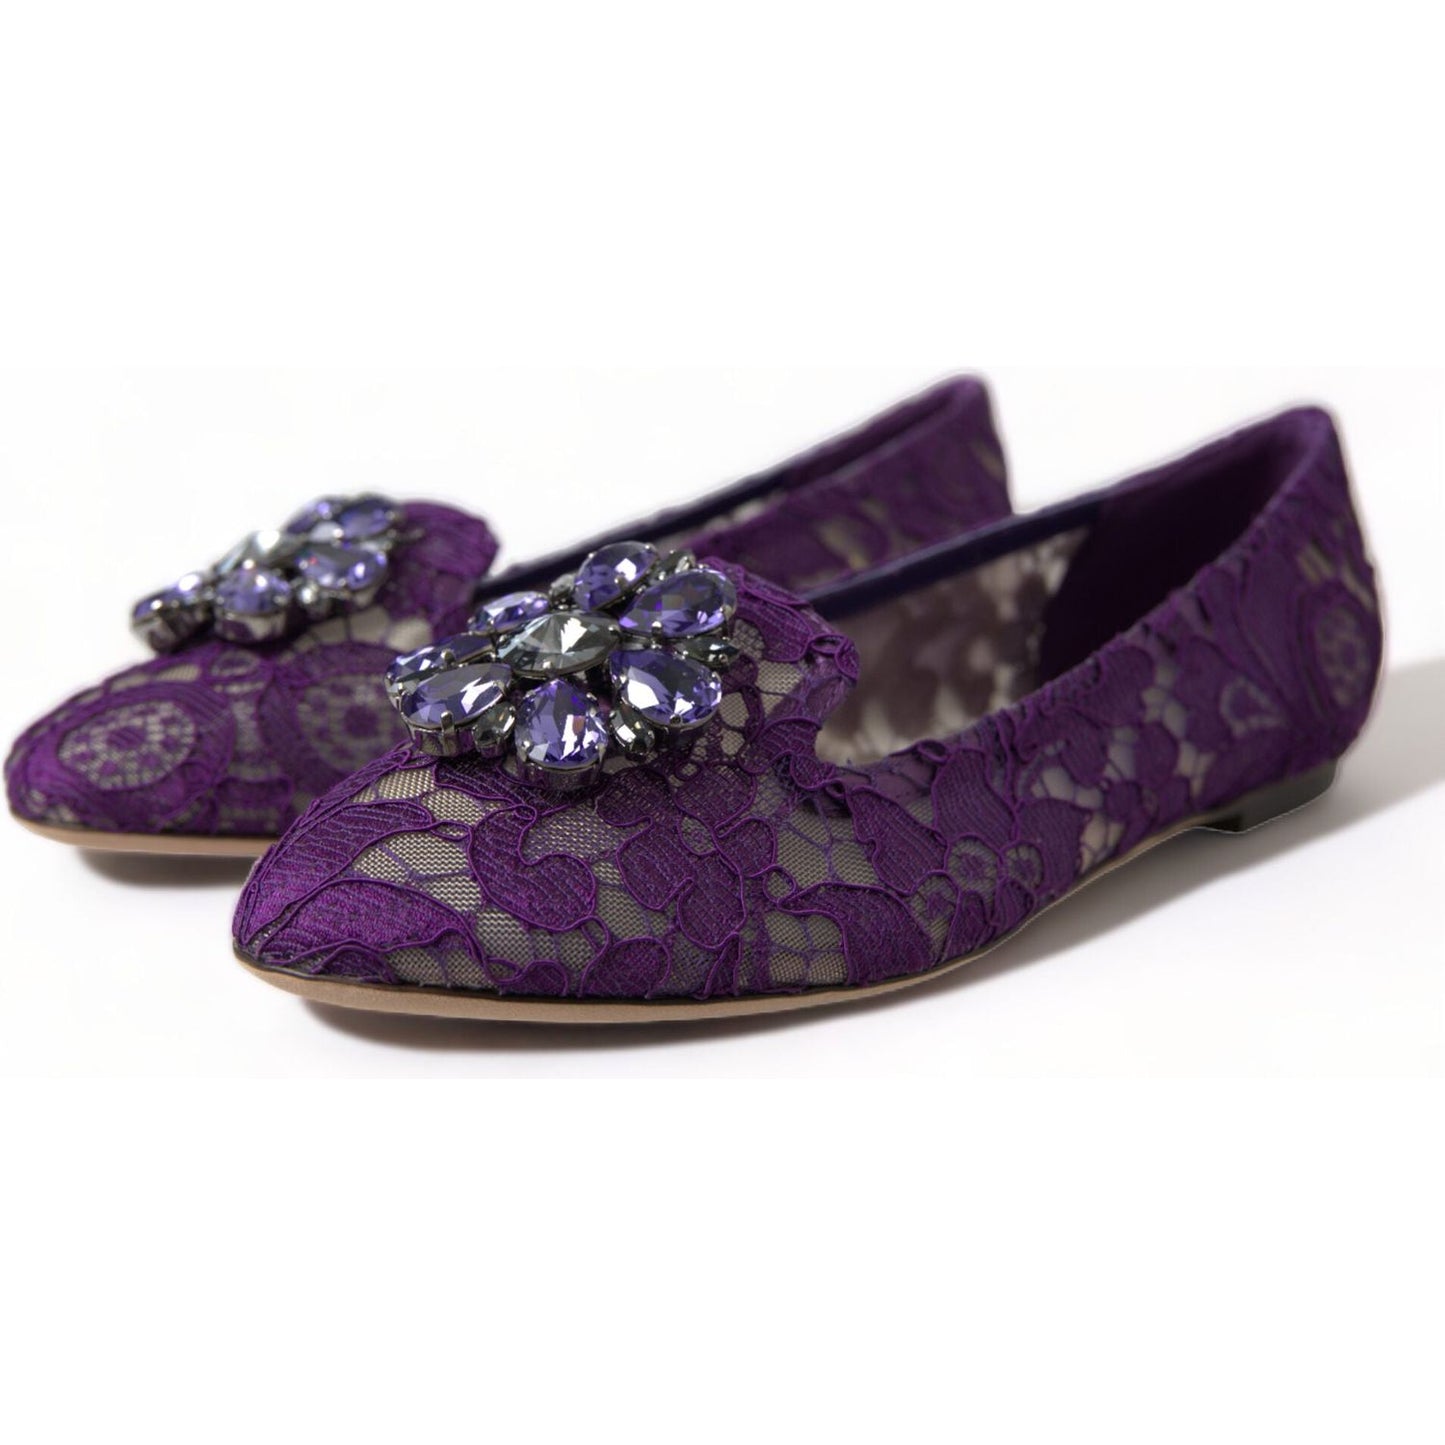 Dolce & Gabbana Elegant Floral Lace Vally Flat Shoes purple-vally-taormina-lace-crystals-flats-shoes